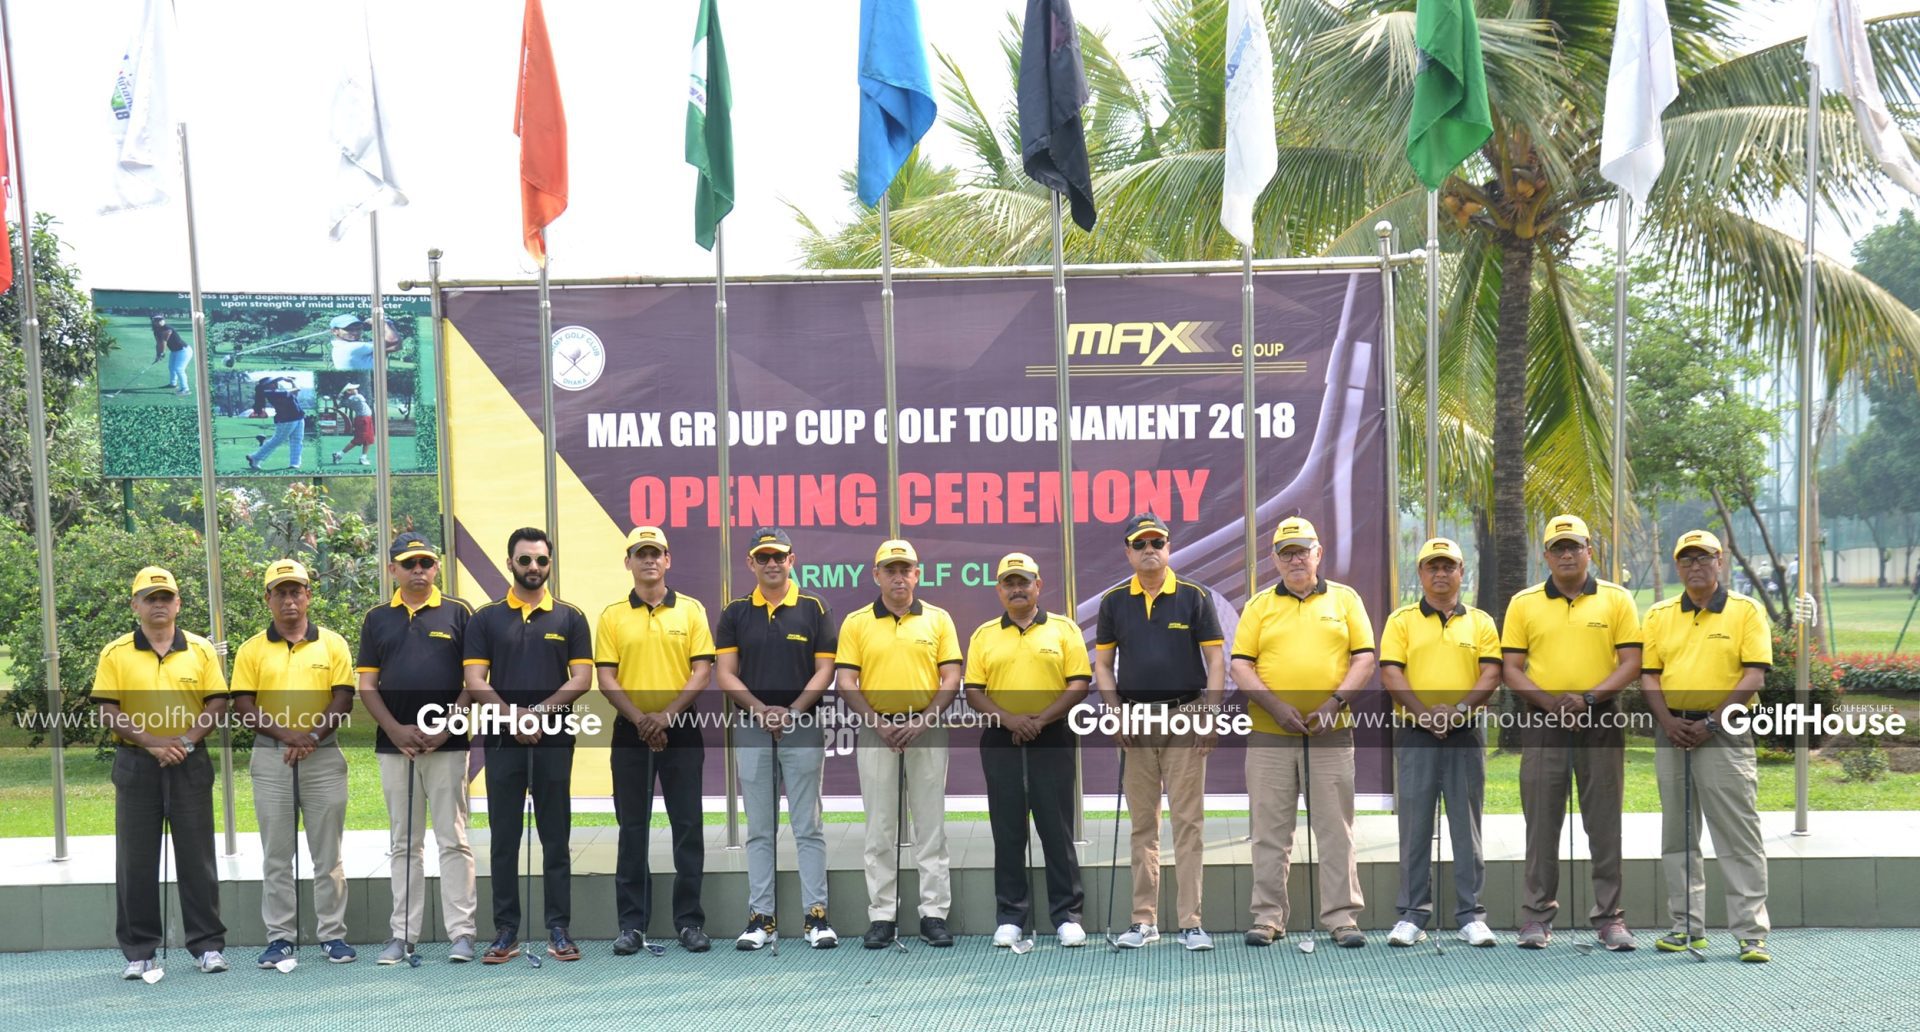 Among_689_golfers_Wg_Cdr_Md_Shafiqur_Rahman_(Retd)_won_the_title_of_the_four_dayMax_Group_Cup_Golf_Tournament_2018